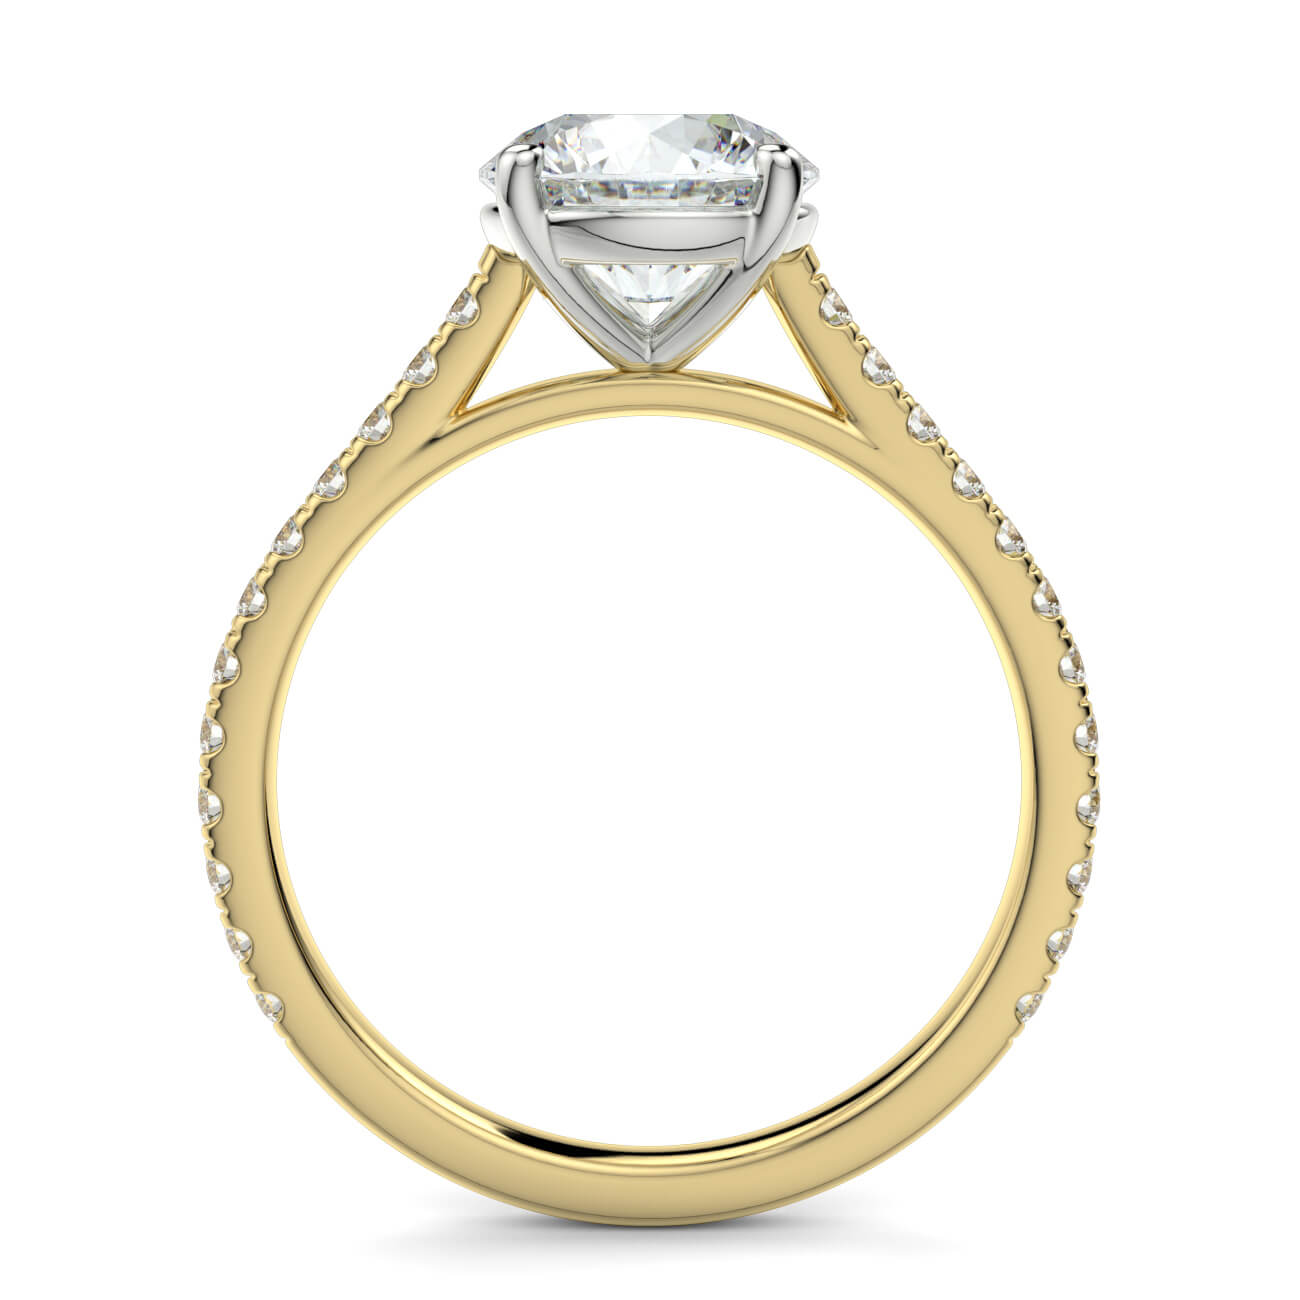 Classic cathedral diamond engagement ring in yellow and white gold – Australian Diamond Network